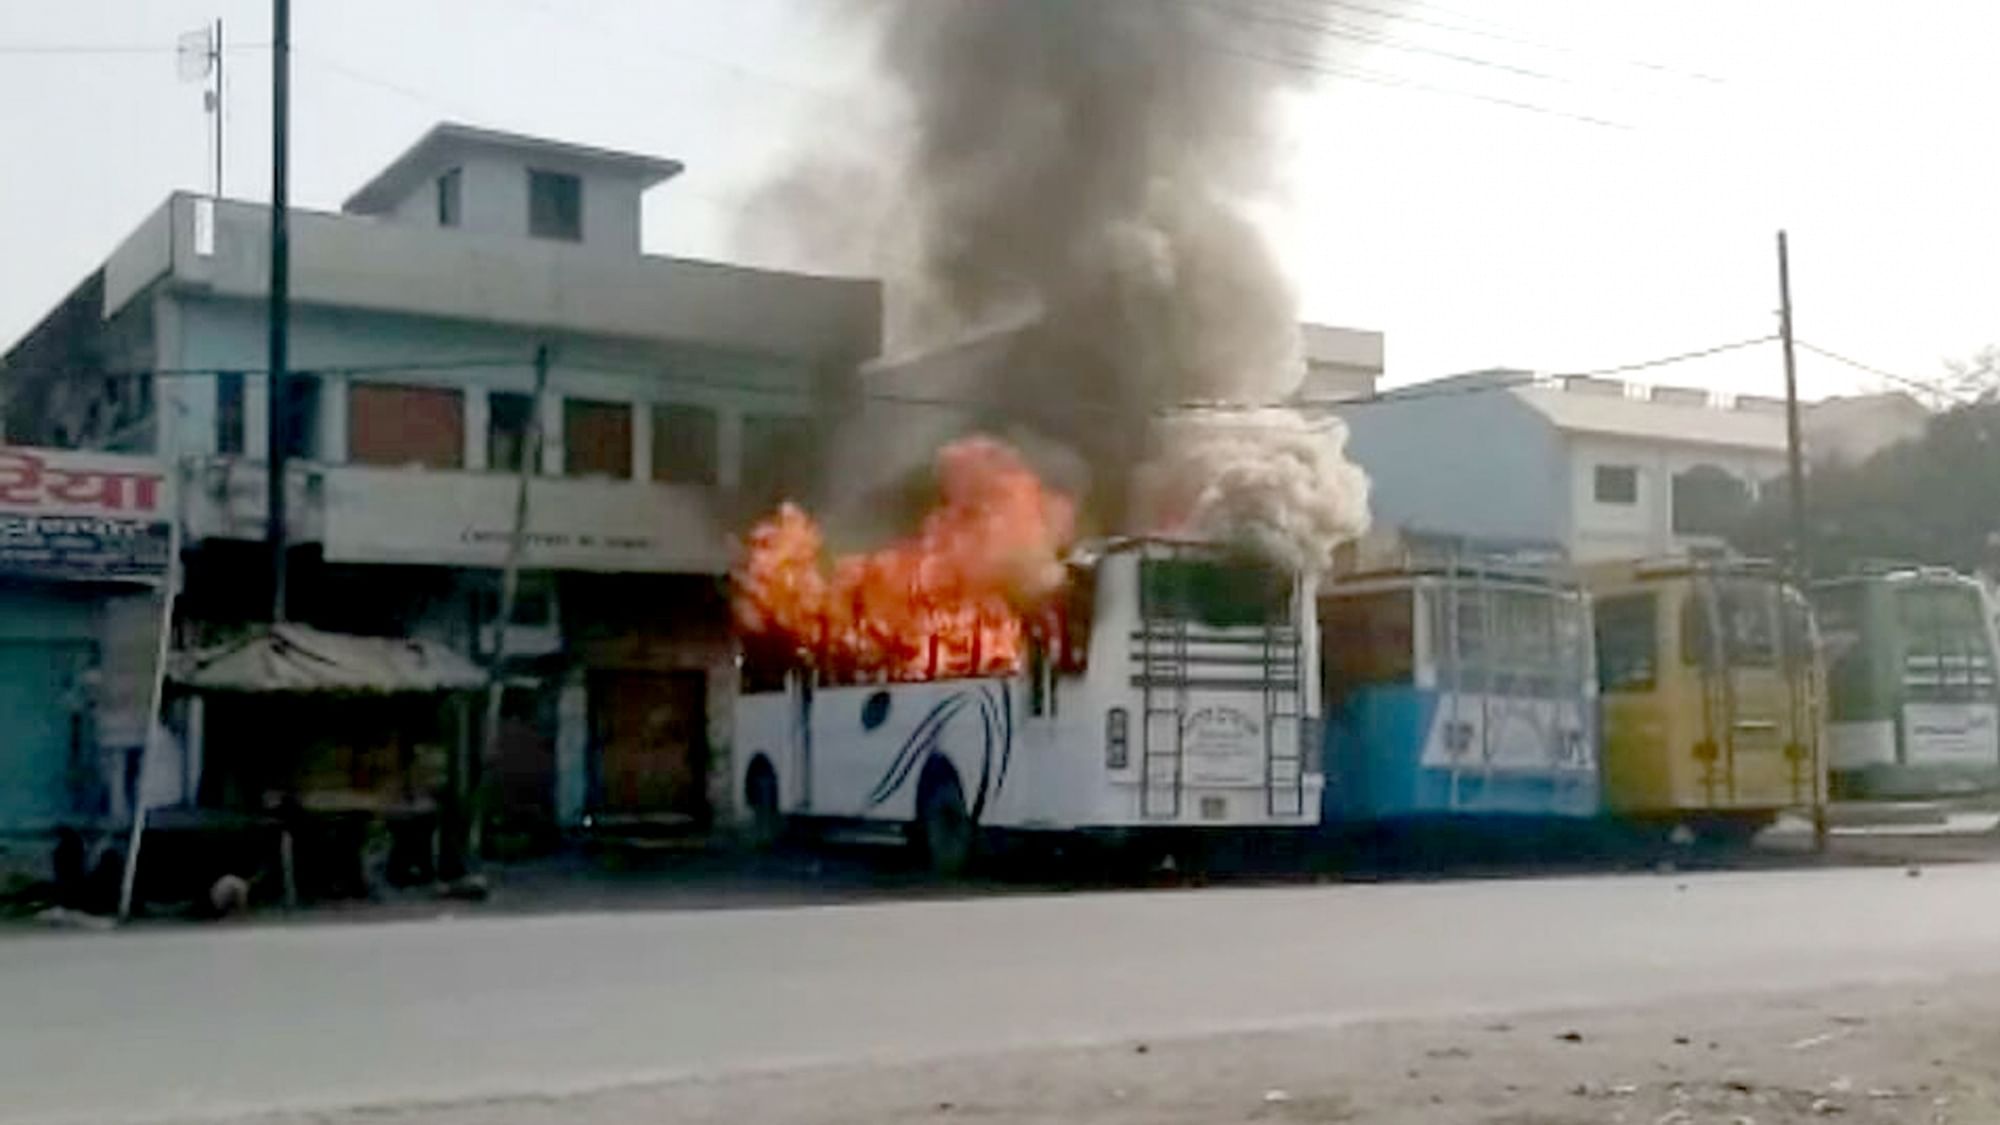  A bus set on fire by an irate mob as two communities clashed in Kasganj district of Uttar Pradesh on 27 Jan, 2018.&nbsp;